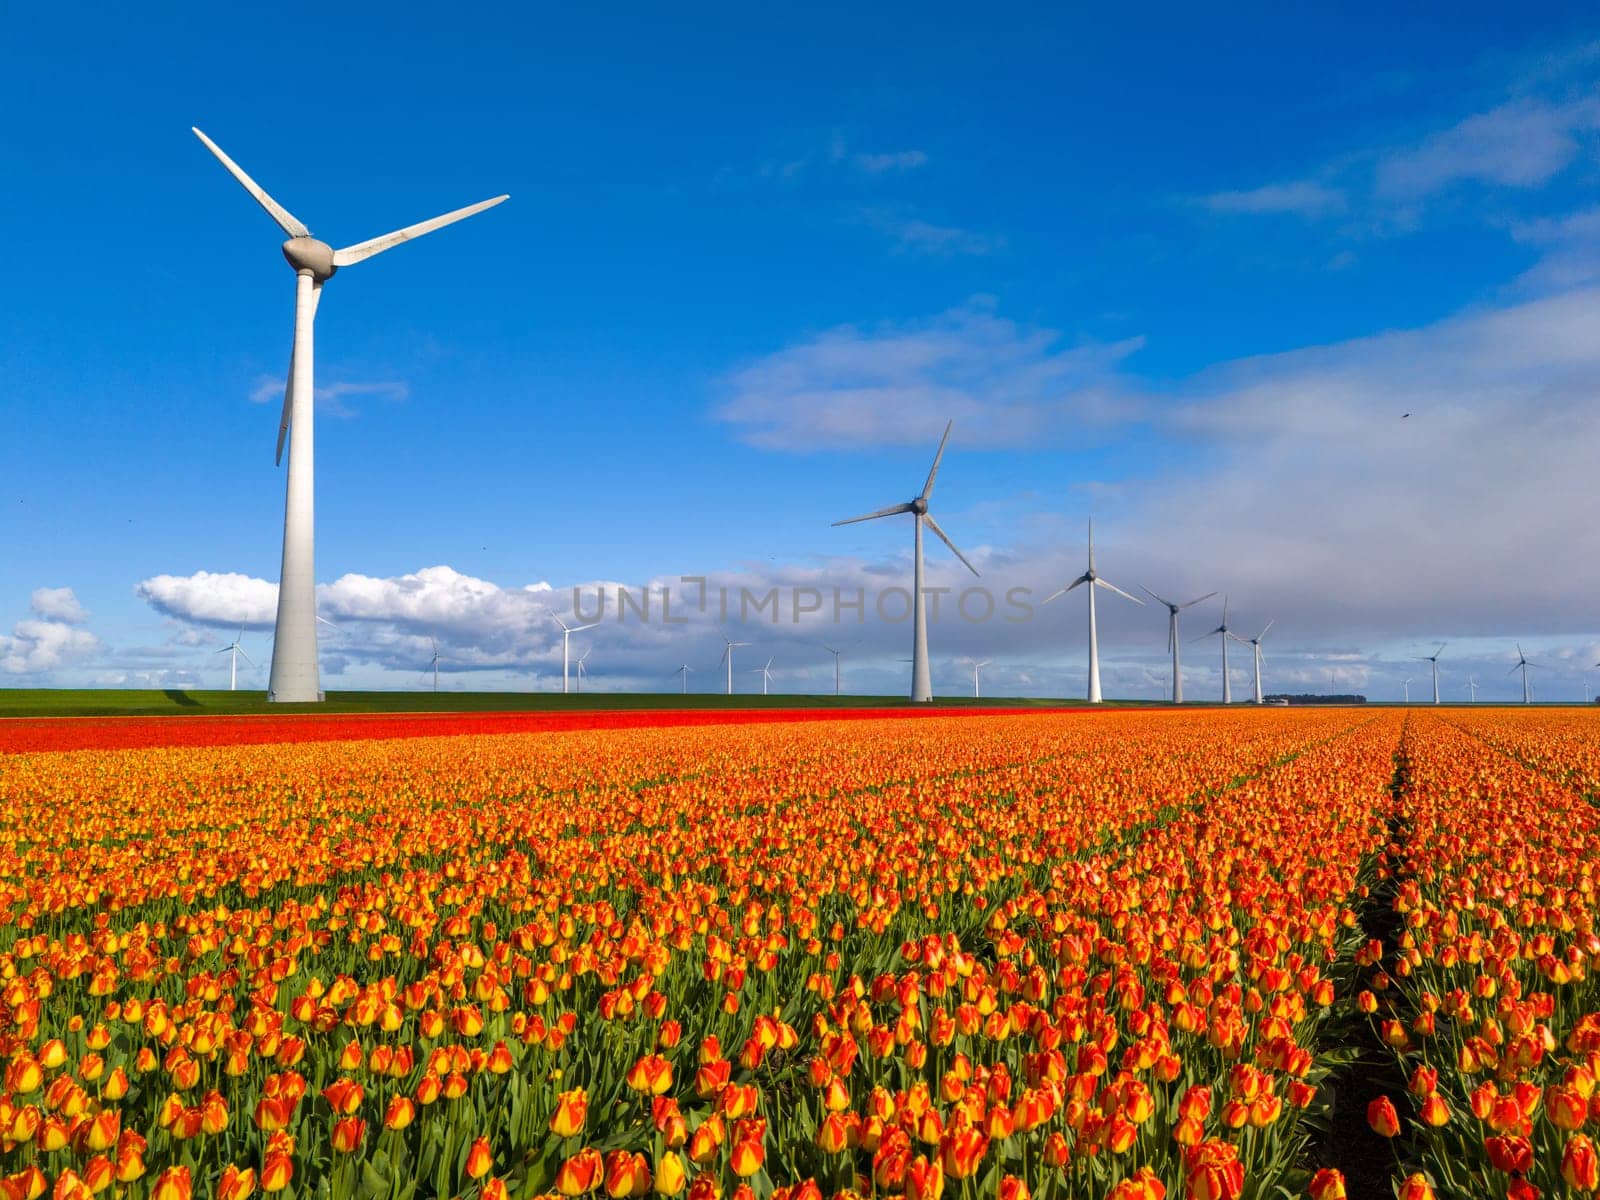 offshore windmill park with clouds and a blue sky, windmill park in the ocean drone aerial view with wind turbine Flevoland Netherlands Ijsselmeer by fokkebok